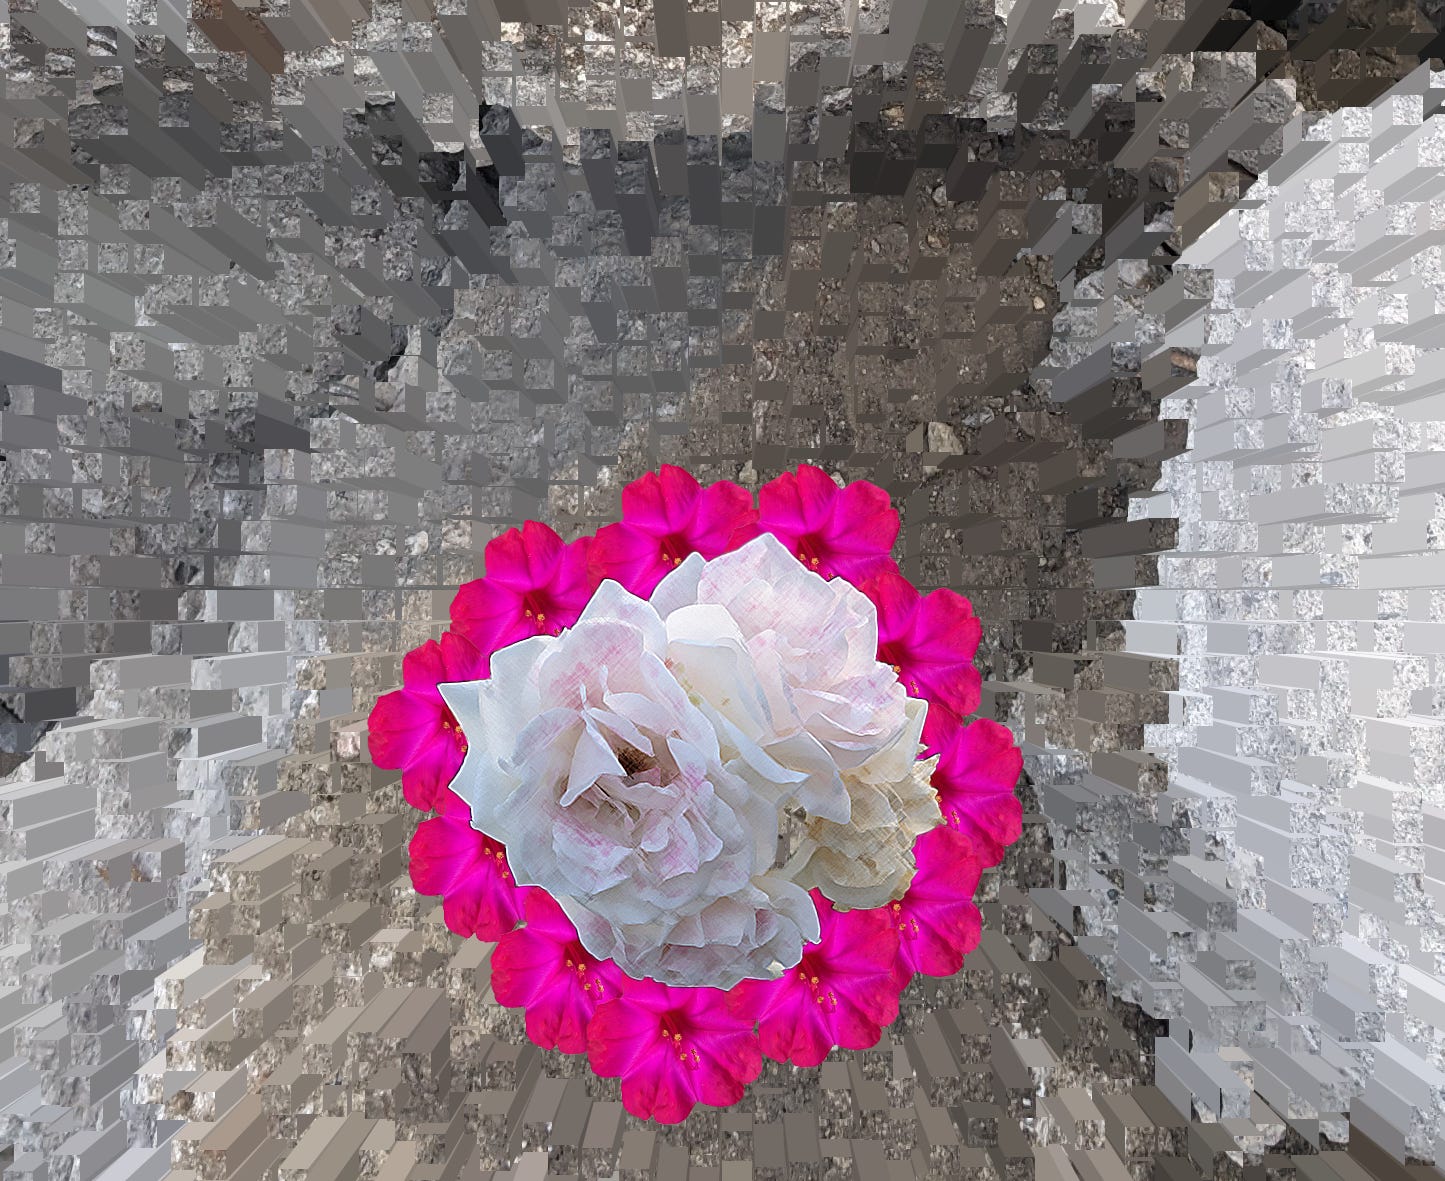 A photo collage by Zel with white and pink flowers over stylized stone